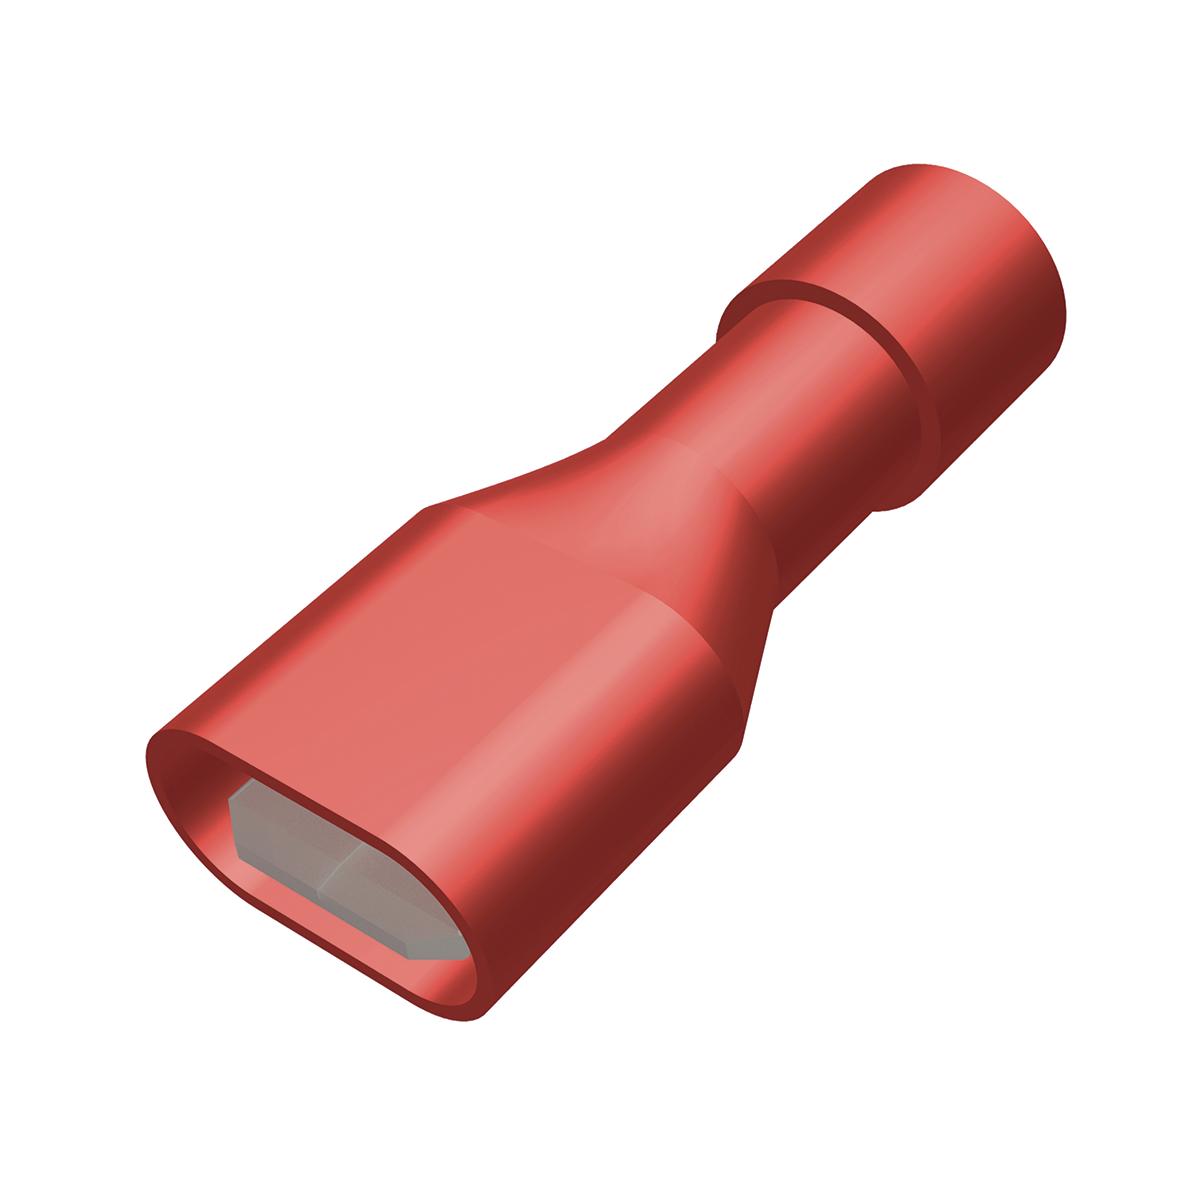 Hubbell FQN18M25X03D Fully Insulated Nylon Male Quick Disconnect For 22 - 18 AWG (.25 x .03).  ; Features: Fully Insulated Connectors: Eliminate The Need For Post Installation Insulation, Funnel Entry Barrel Opening: Assures Quick And Easy Wire Insertion, Dimpled Female Socke